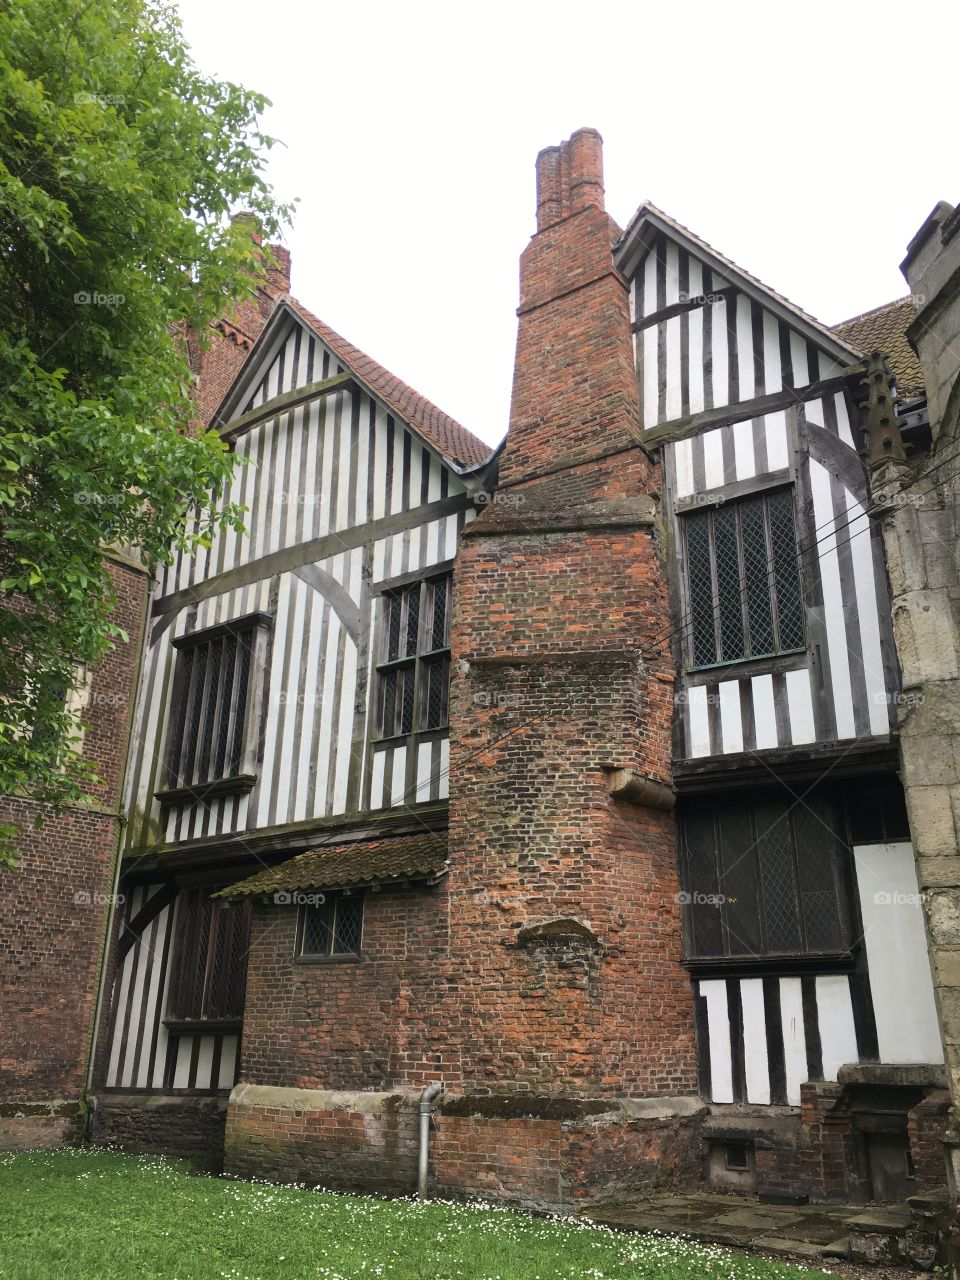 Exterior view of the brickwork and a chimney with timber framing of the medieval Manor House at Gainsborough Old Hall